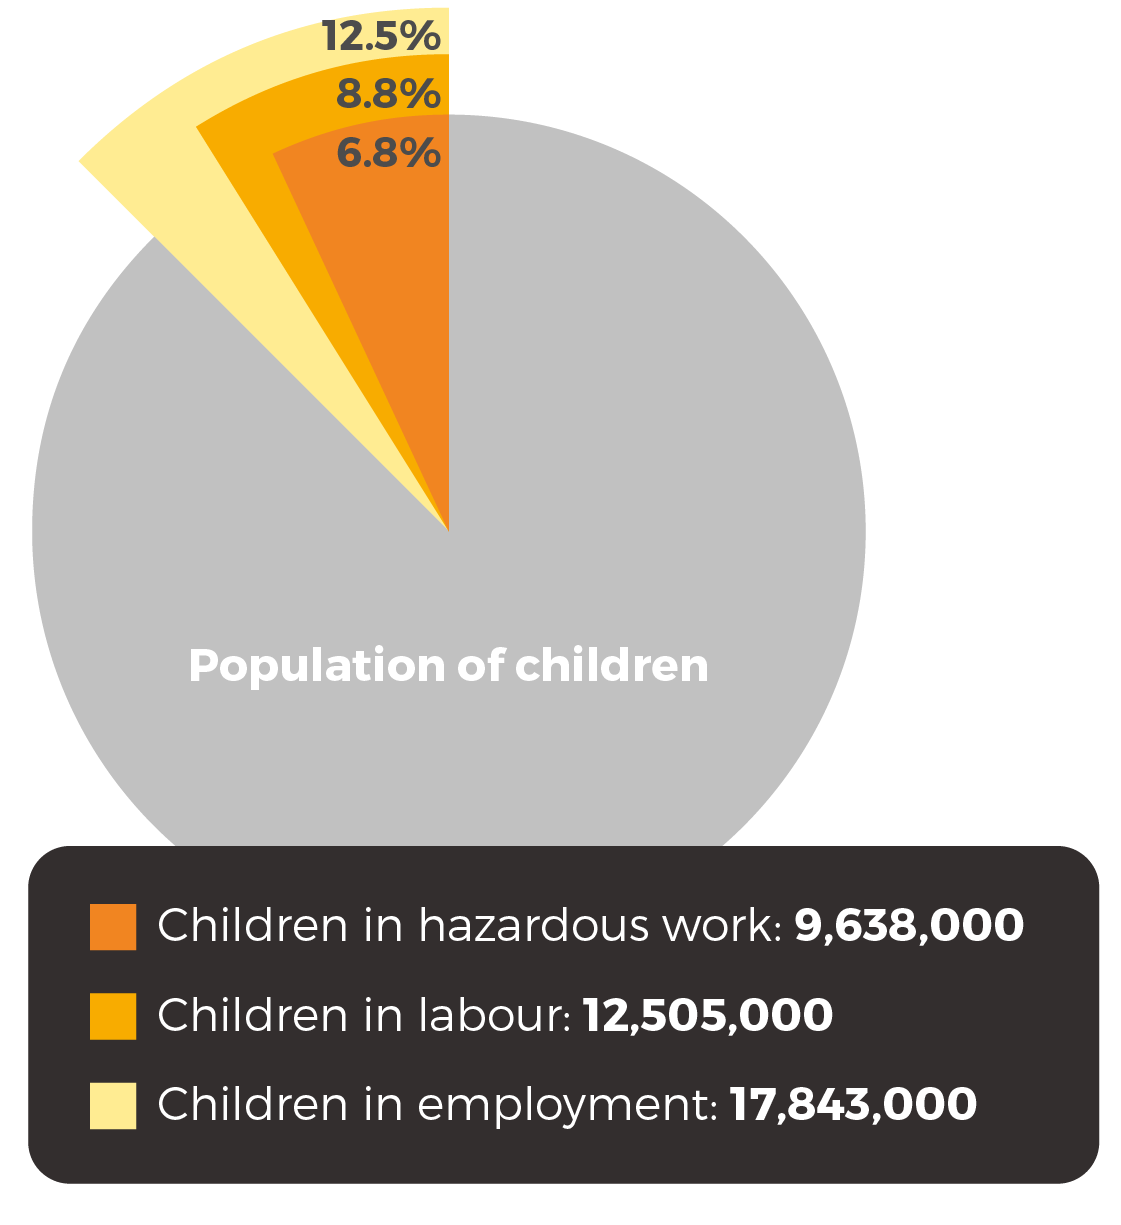 17.8m children are in employment; 12.5m are in child labour and 9.6m in hazardous work 